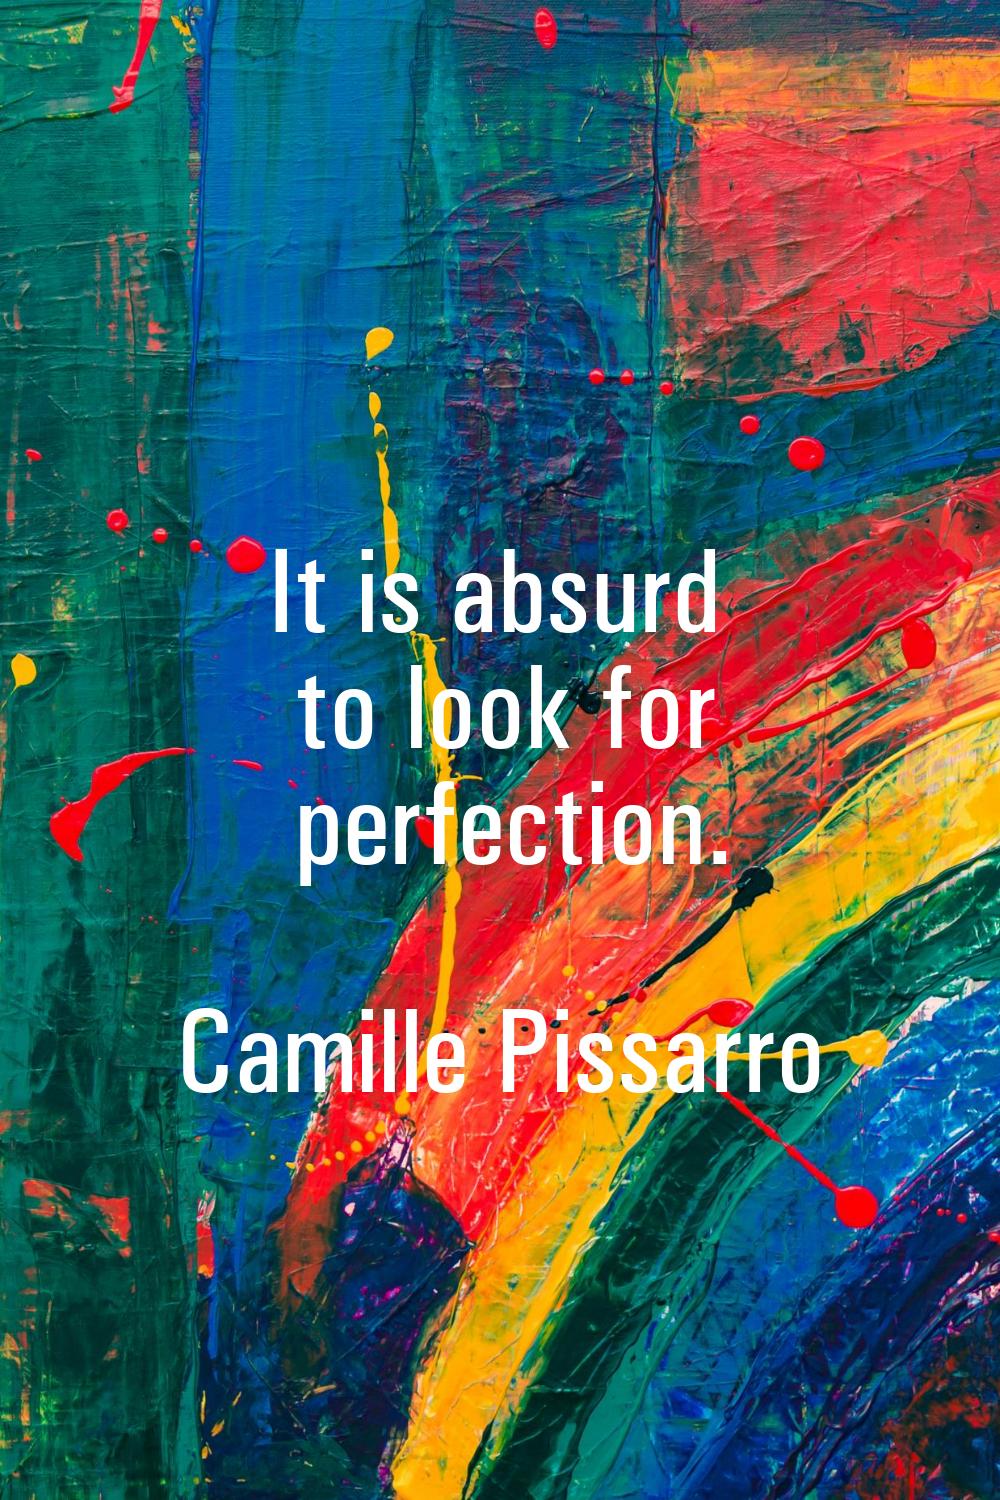 It is absurd to look for perfection.